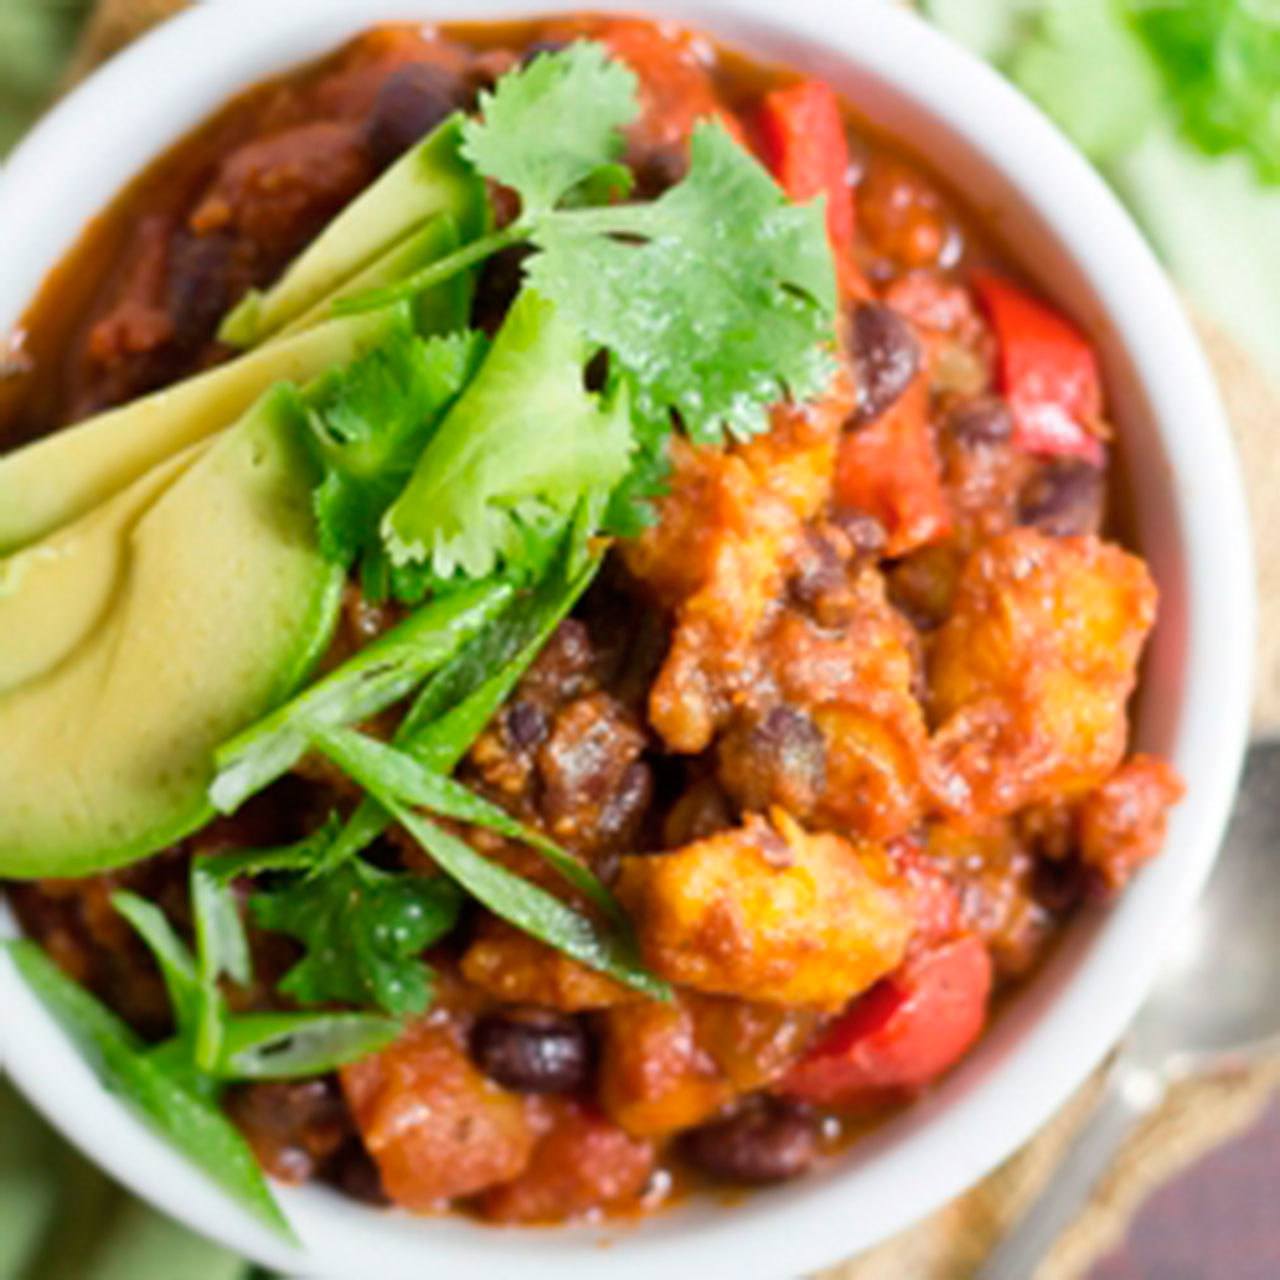 If you are making a gradual switch to a plant-based diet, you can use beans in your chili recipe and eliminate the meat. (Contributed photo)